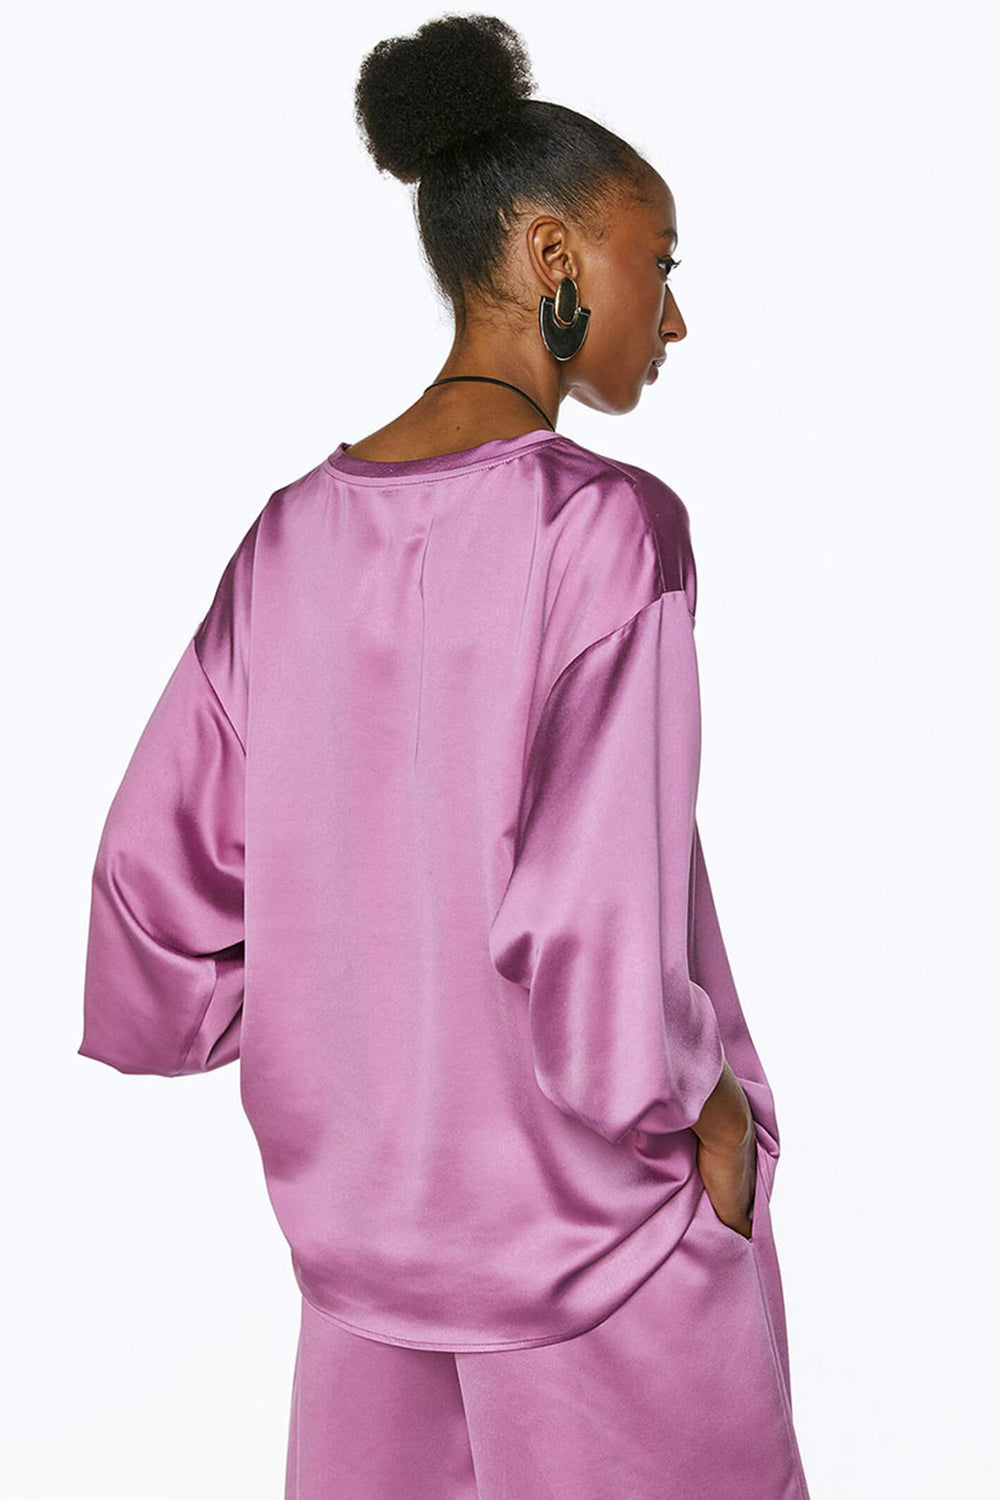 Access Fashion 2085-134 Grape Pink Satin Long Sleeve Top - Experience Boutique